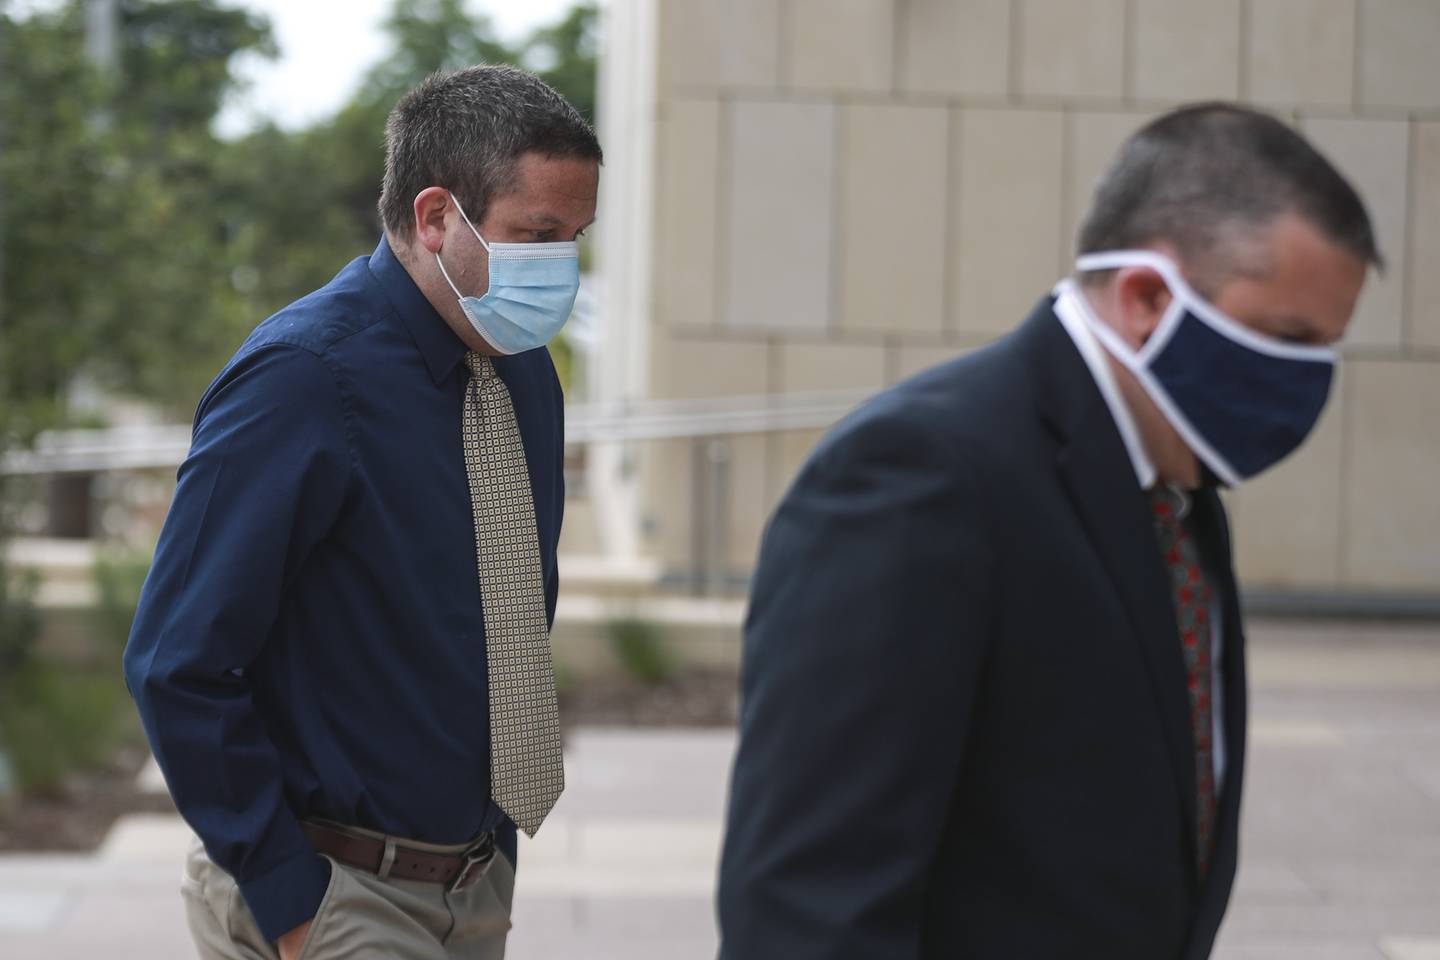 Jeremy Hylka (left) enters the courthouse ahead of his arraignment on Thursday, June 24, 2021, at Will County Court House in Joliet, Ill.